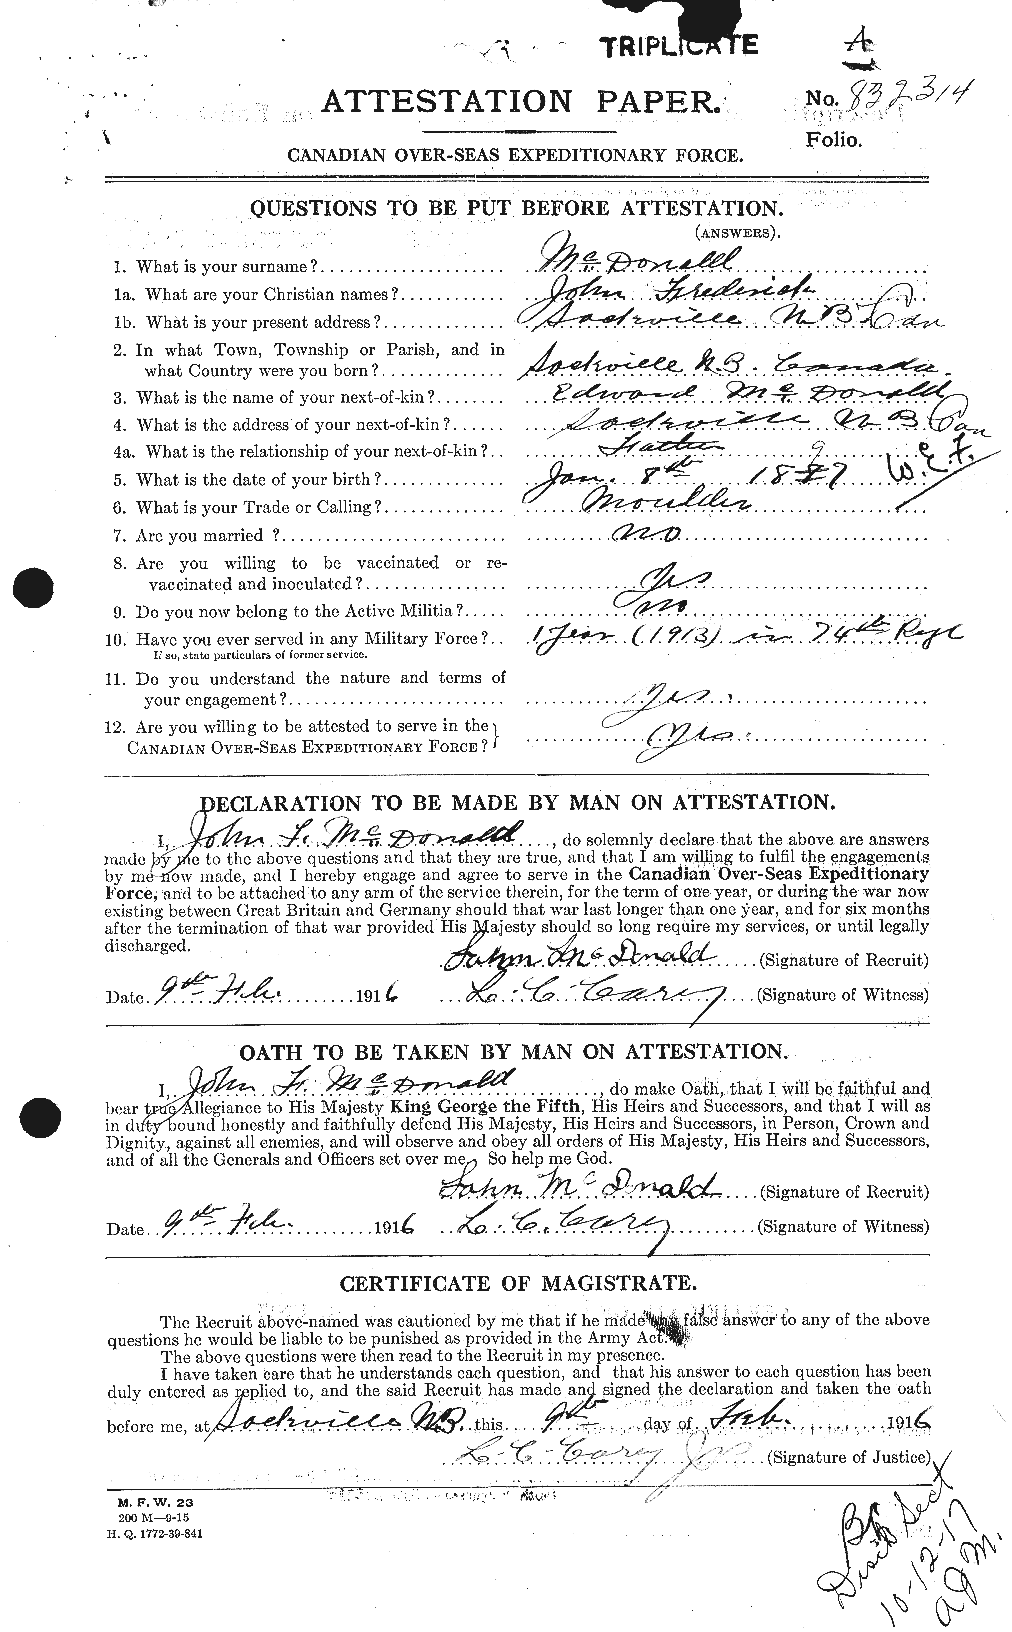 Personnel Records of the First World War - CEF 519464a